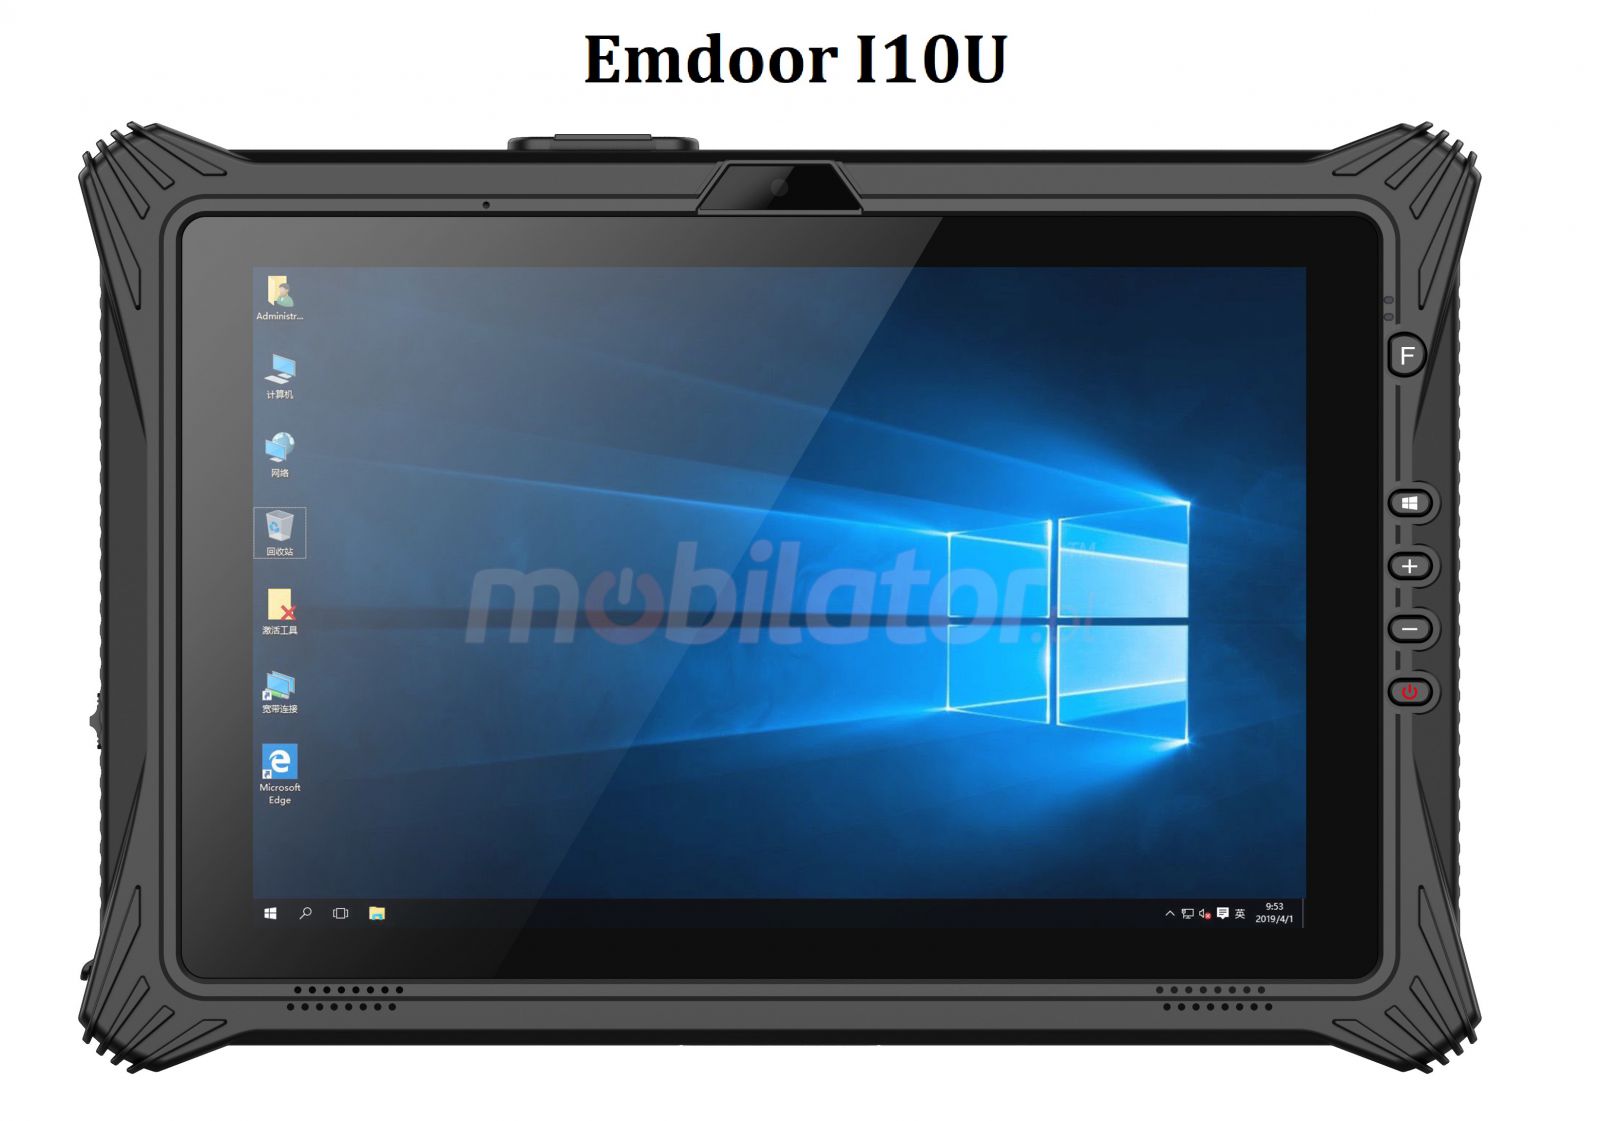 Emdoor I10U v.20 - Drop-proof 10.1 inch tablet with Intel i7, 2D barcode scanner, NFC, 16GB RAM and 256GB SSD, Windows 10 PRO 